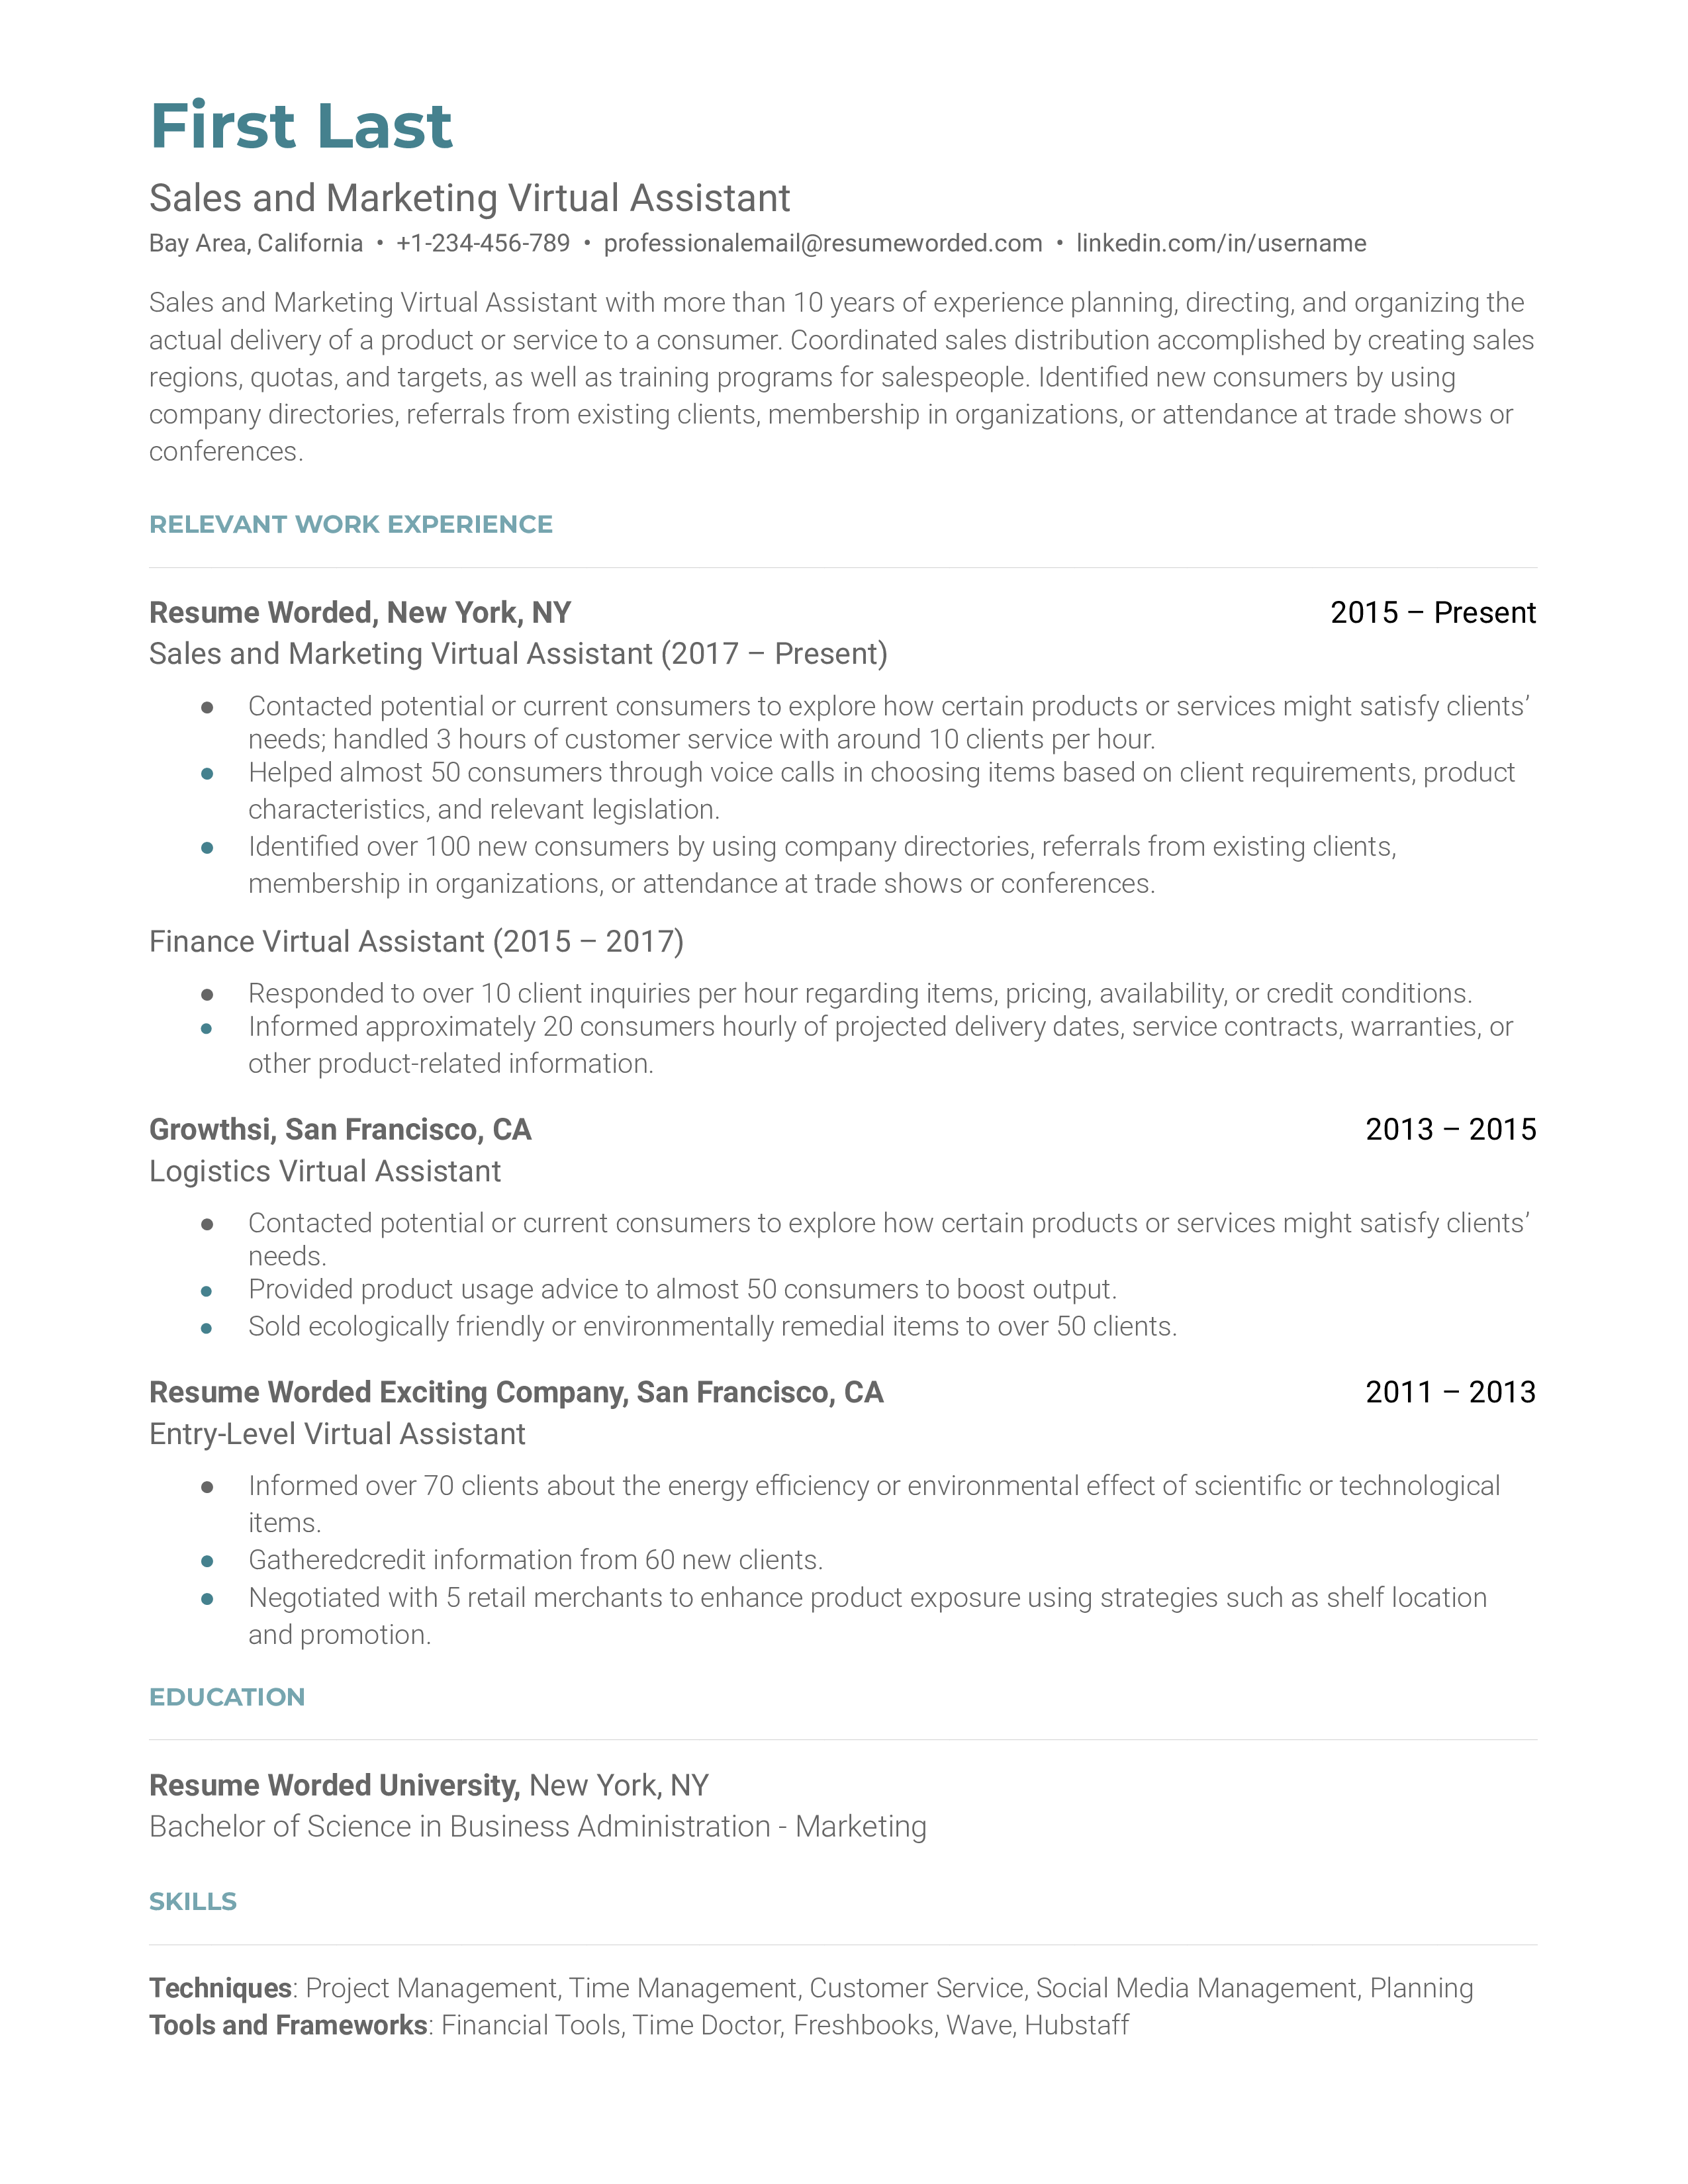 Sales and Marketing Virtual Assistant Resume Template + Example